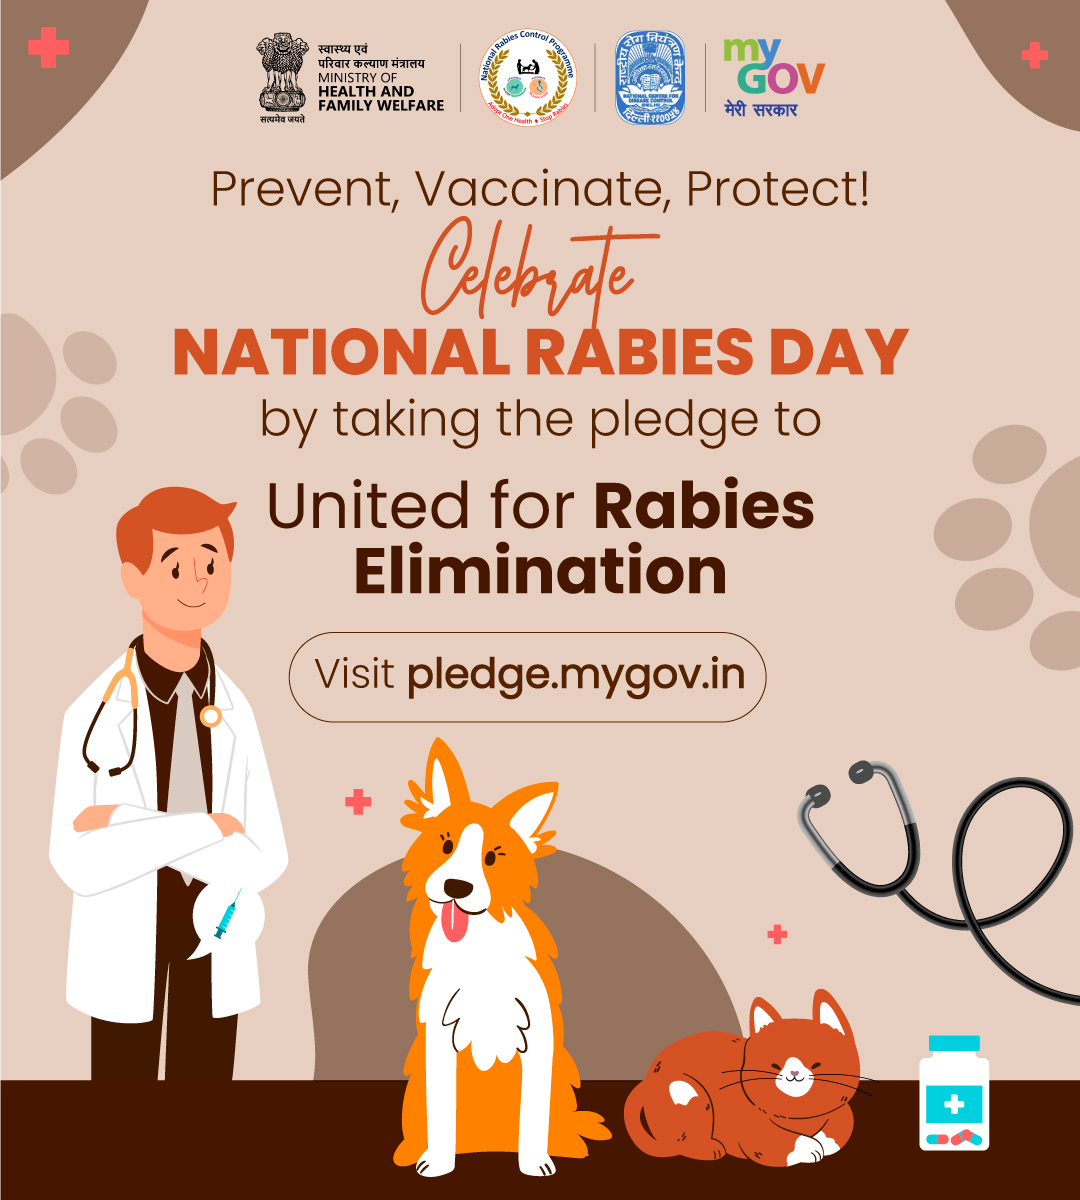 Every pledge counts in the fight against rabies. 

Join the 'United for Rabies Elimination' campaign at pledge.mygov.in/united-for-rab… and be a part of this global effort to save lives. 

#RabiesAwareness #RabiesPrevention